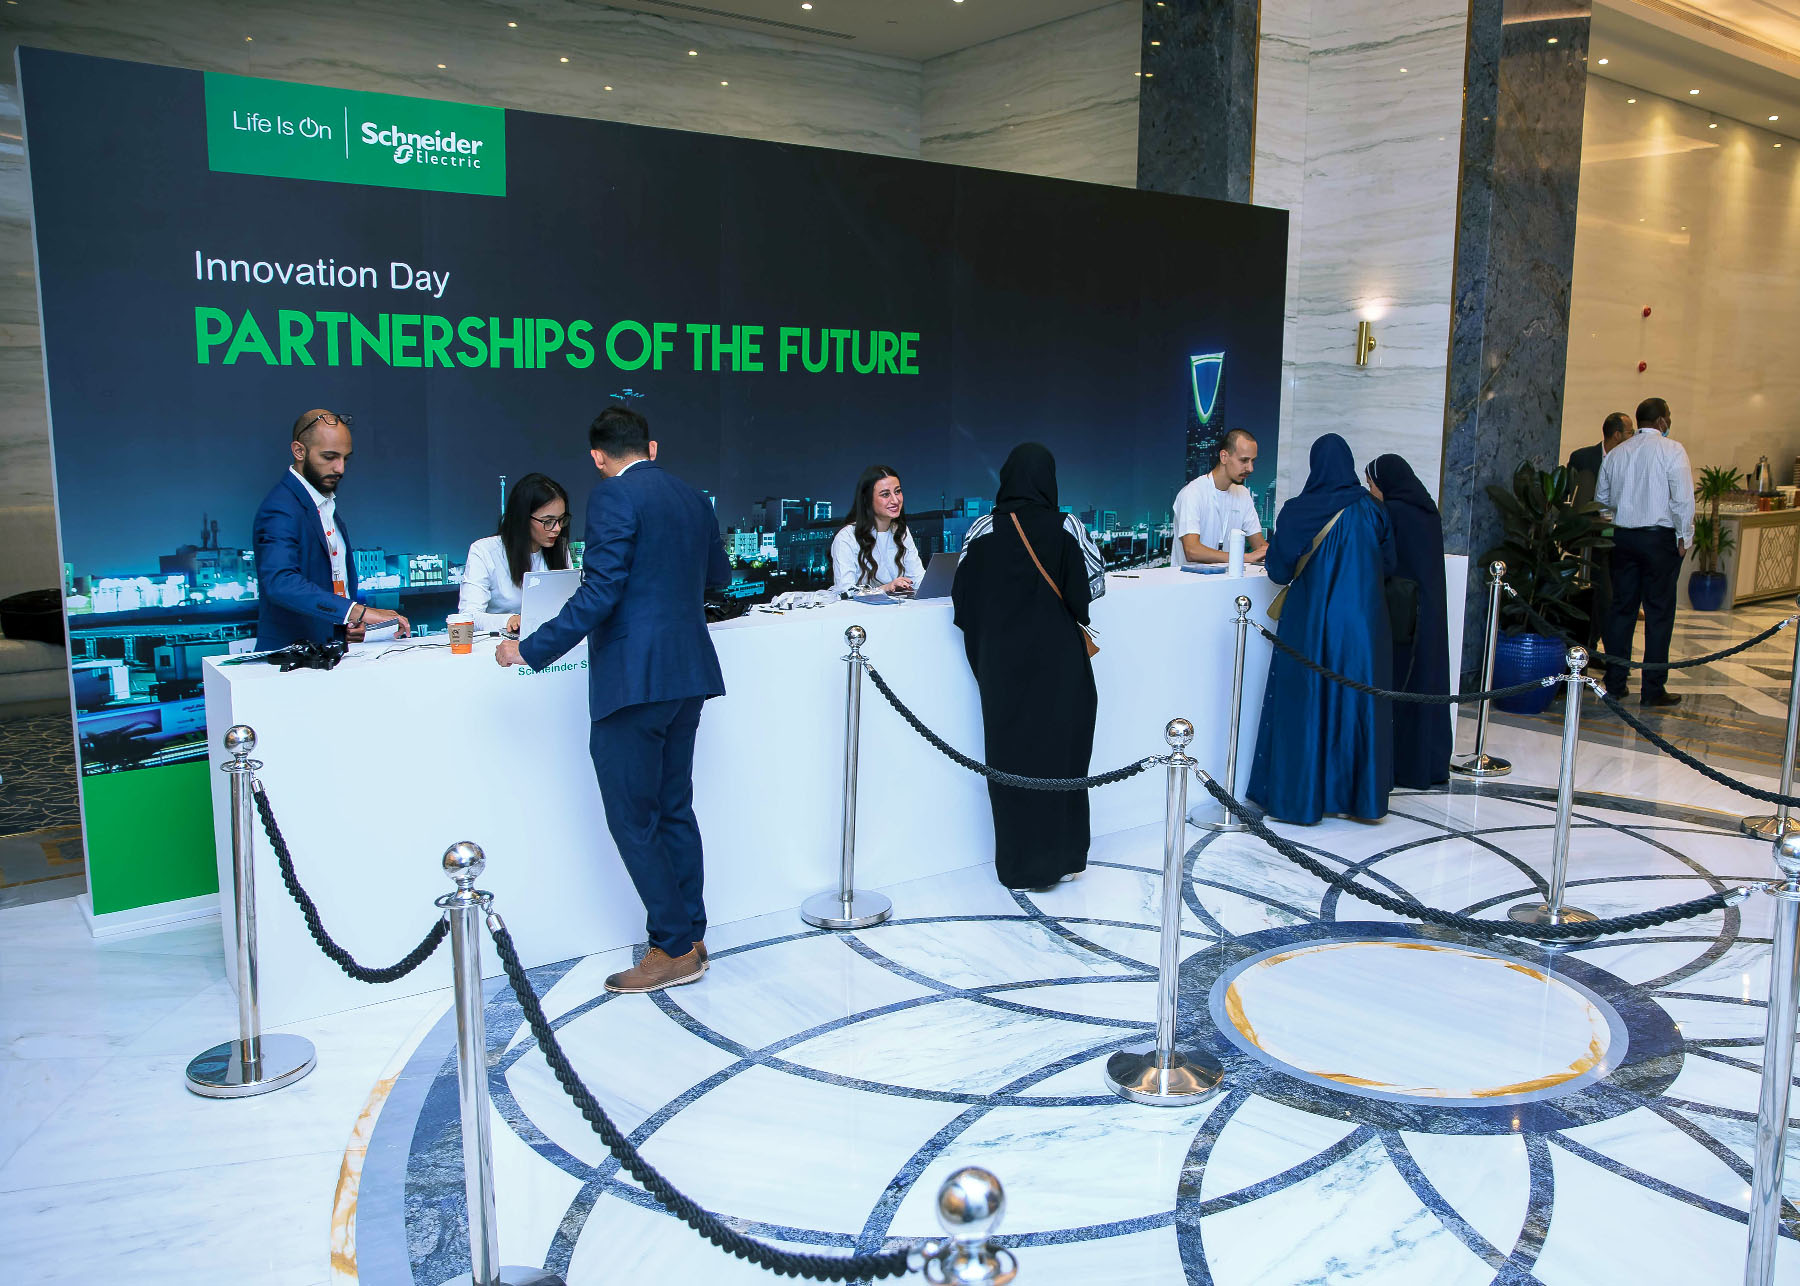 Schneider Electric event reception desk  with attendees